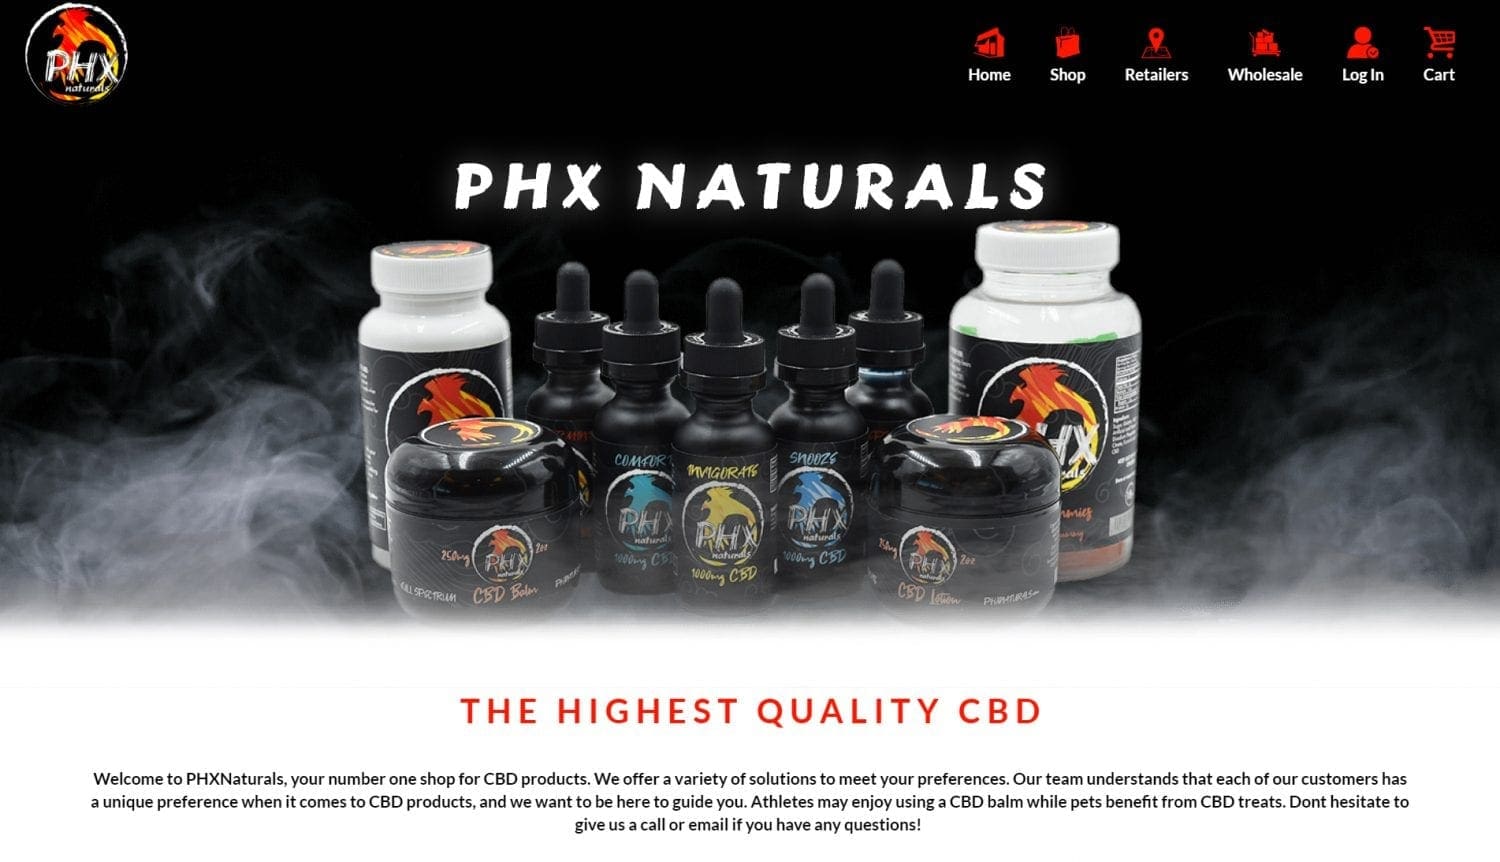 Featured image for “Phoenix Naturals”